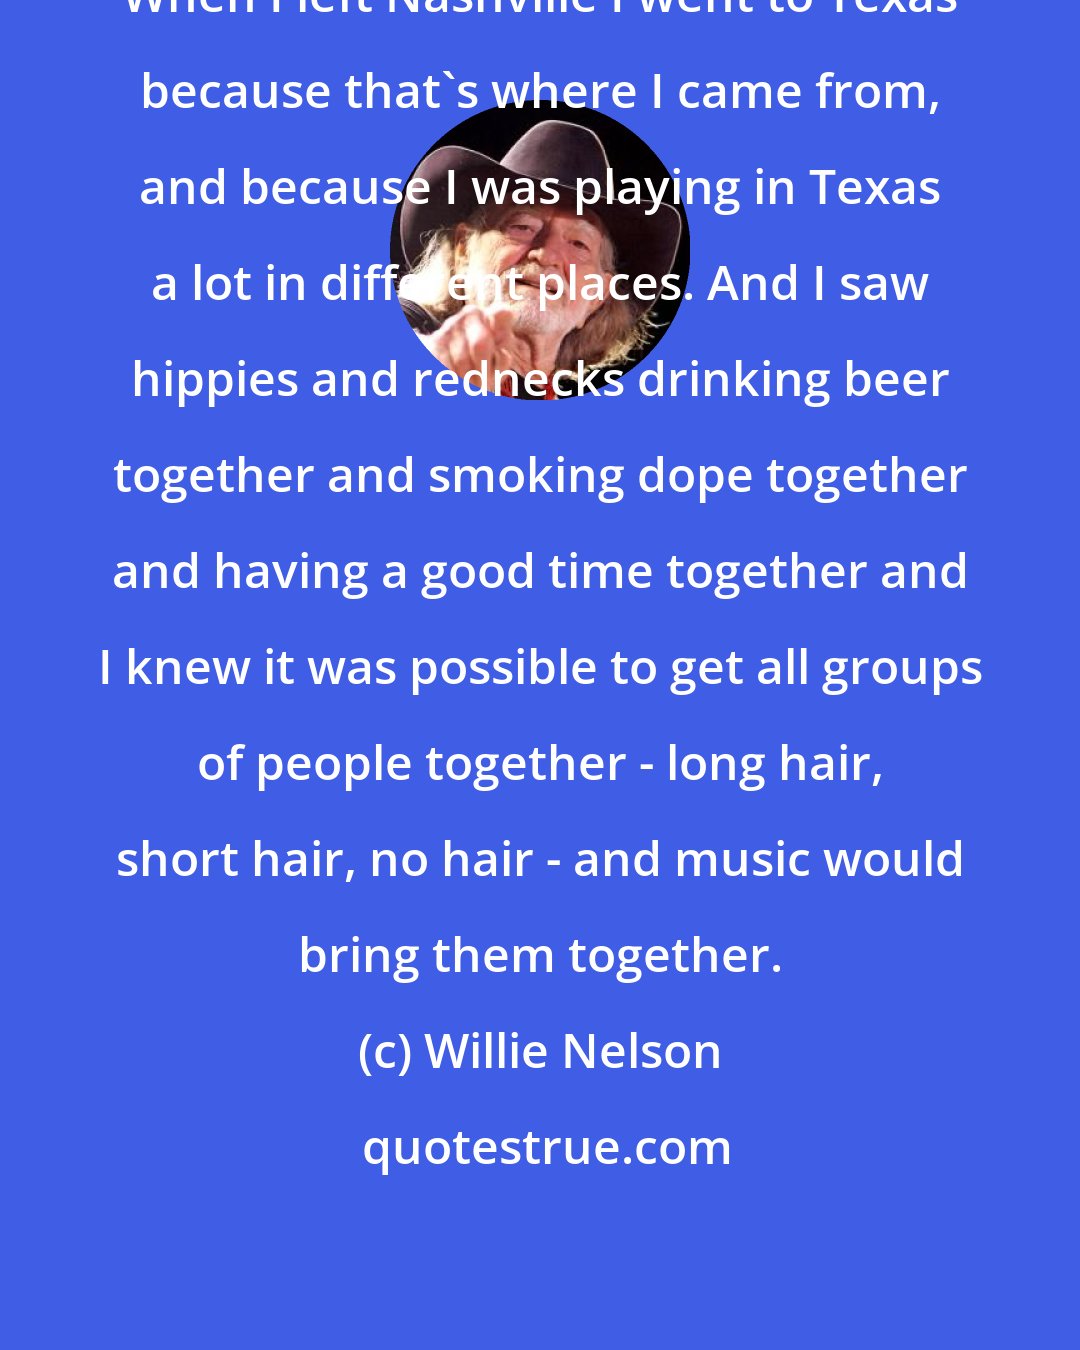 Willie Nelson: When I left Nashville I went to Texas because that's where I came from, and because I was playing in Texas a lot in different places. And I saw hippies and rednecks drinking beer together and smoking dope together and having a good time together and I knew it was possible to get all groups of people together - long hair, short hair, no hair - and music would bring them together.